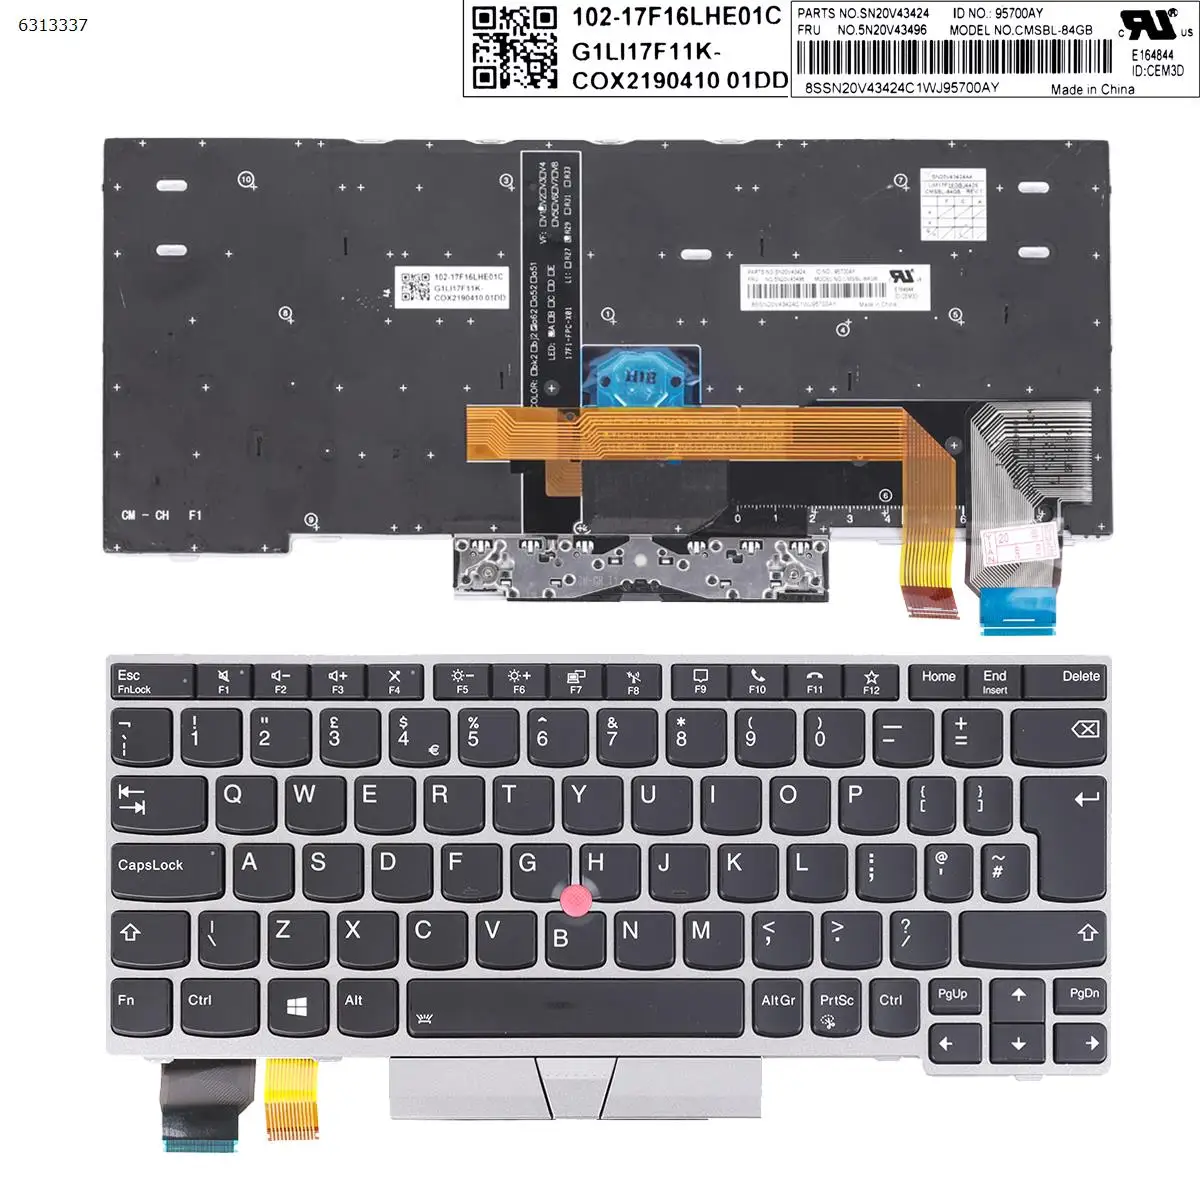 

UK Laptop Keyboard for Lenovo ThinkPad X280 A285 X395 X390 L13 Yoga L13 SILVER FRAME BLACK with point backlit